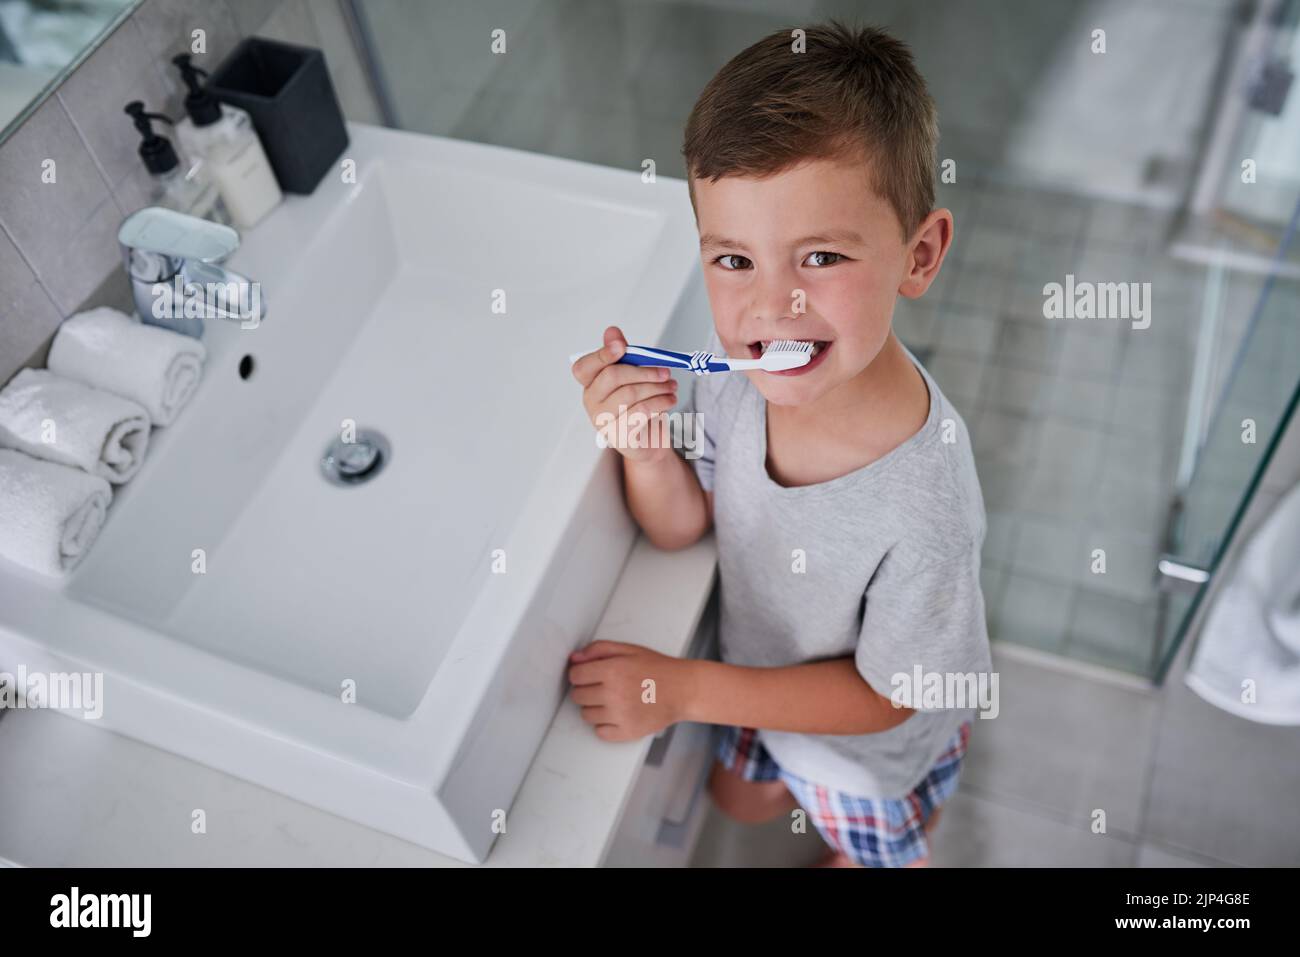 He knows all about healthy habits. Portrait of an adorable little boy brushing his teeth in the bathroom at home. Stock Photo